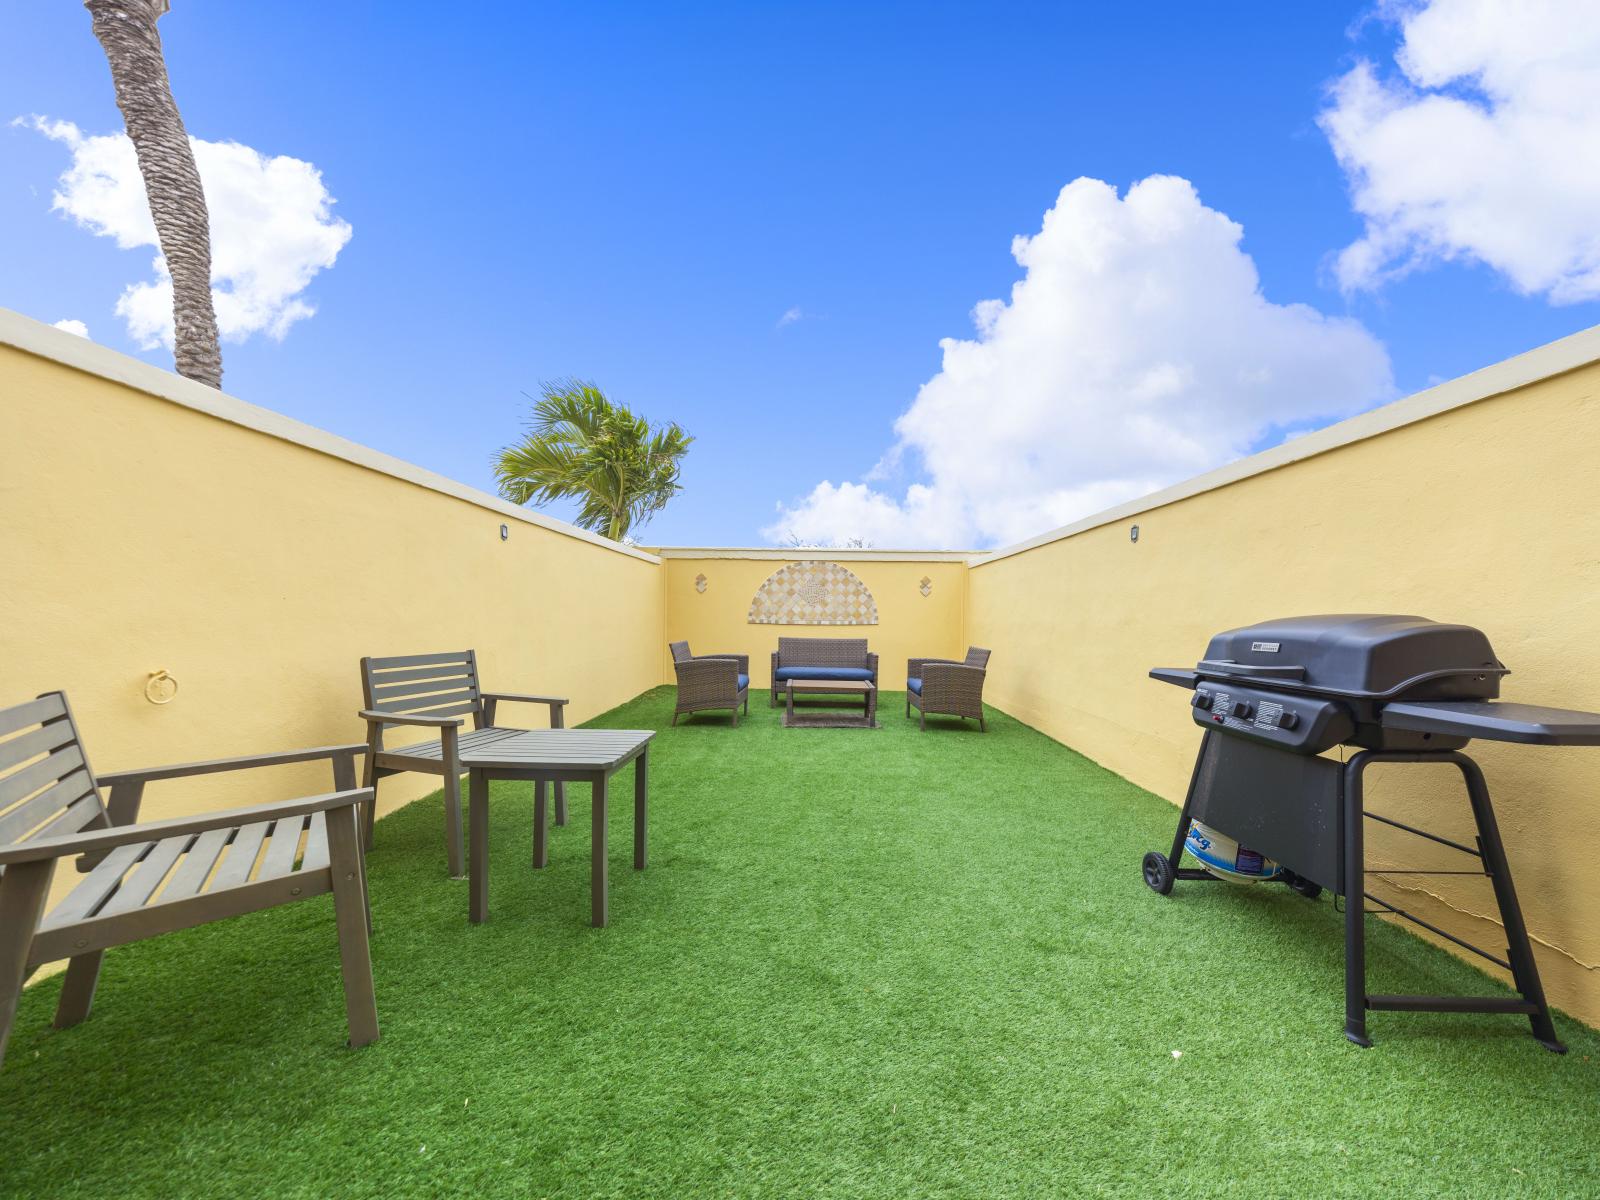 Fire up the grill and savor outdoor cooking at its finest in our spacious grilling area.